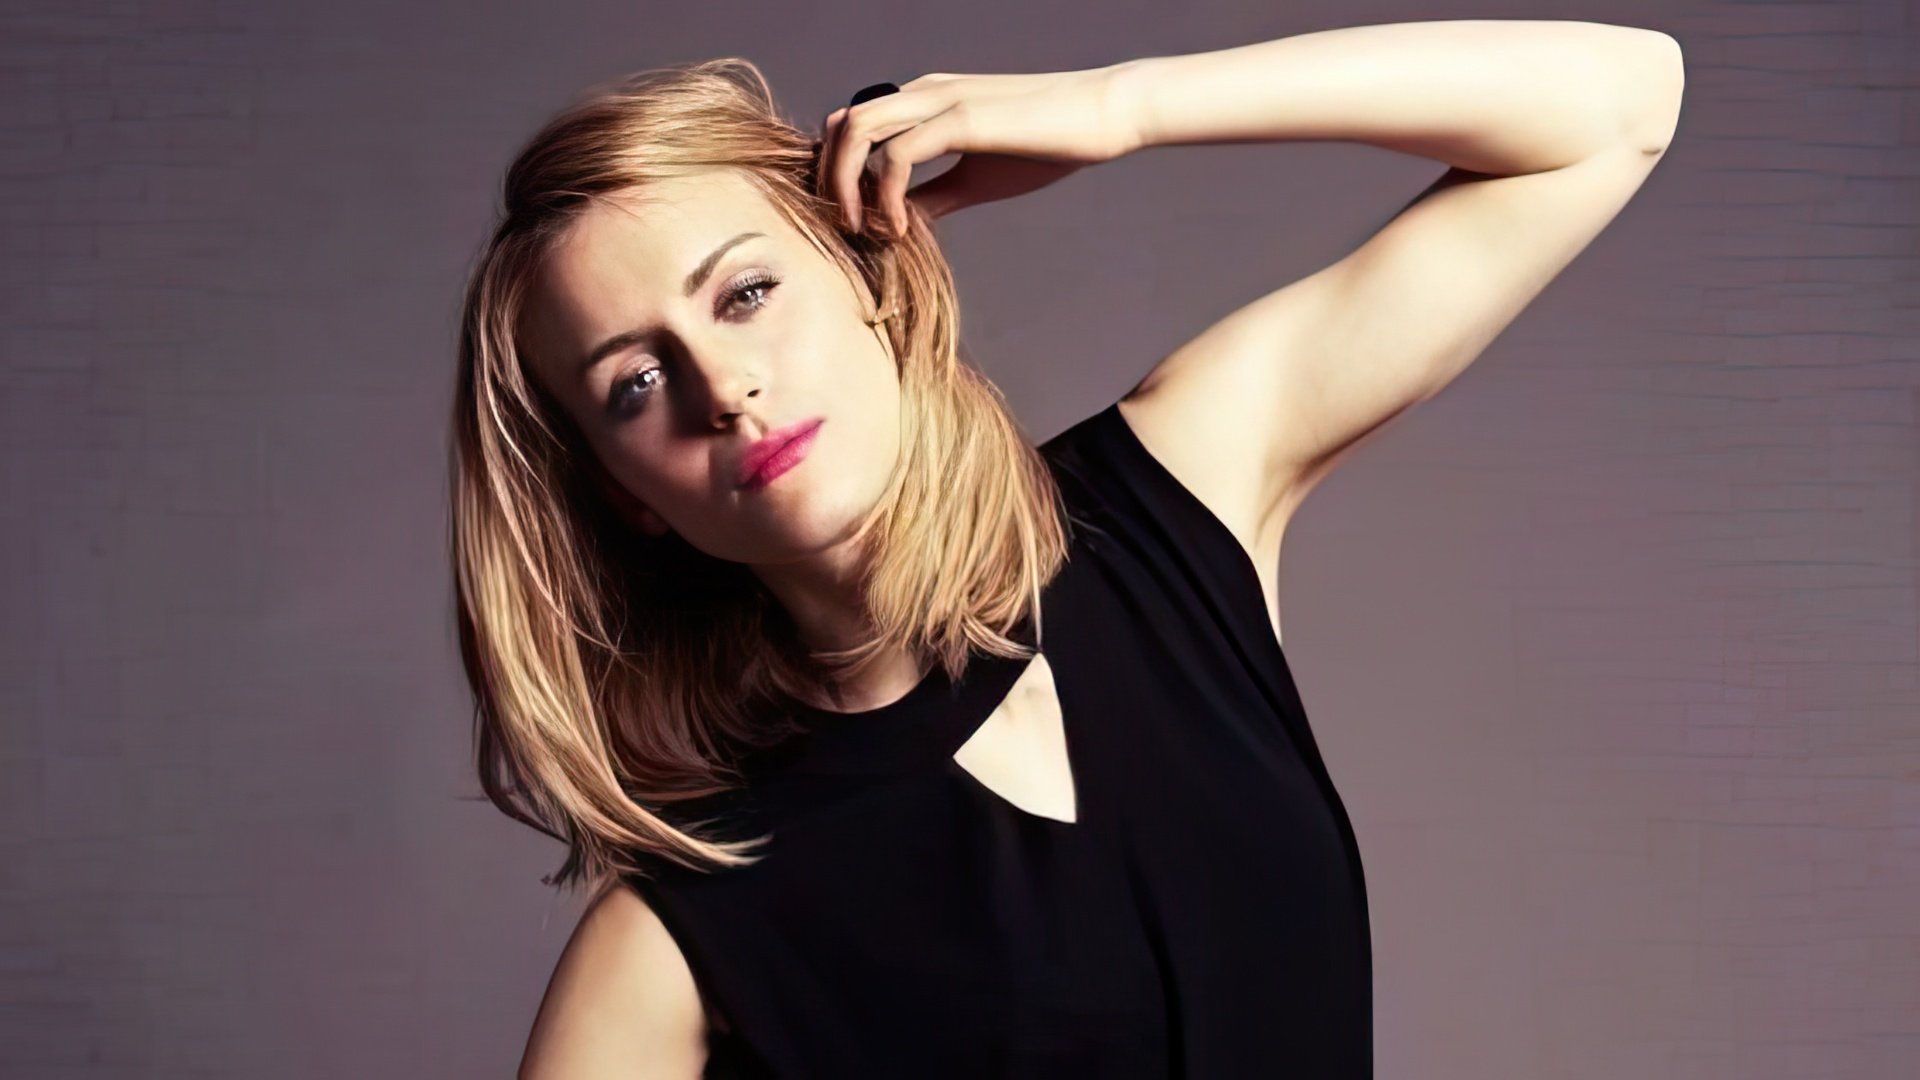 American actress Taylor Schilling